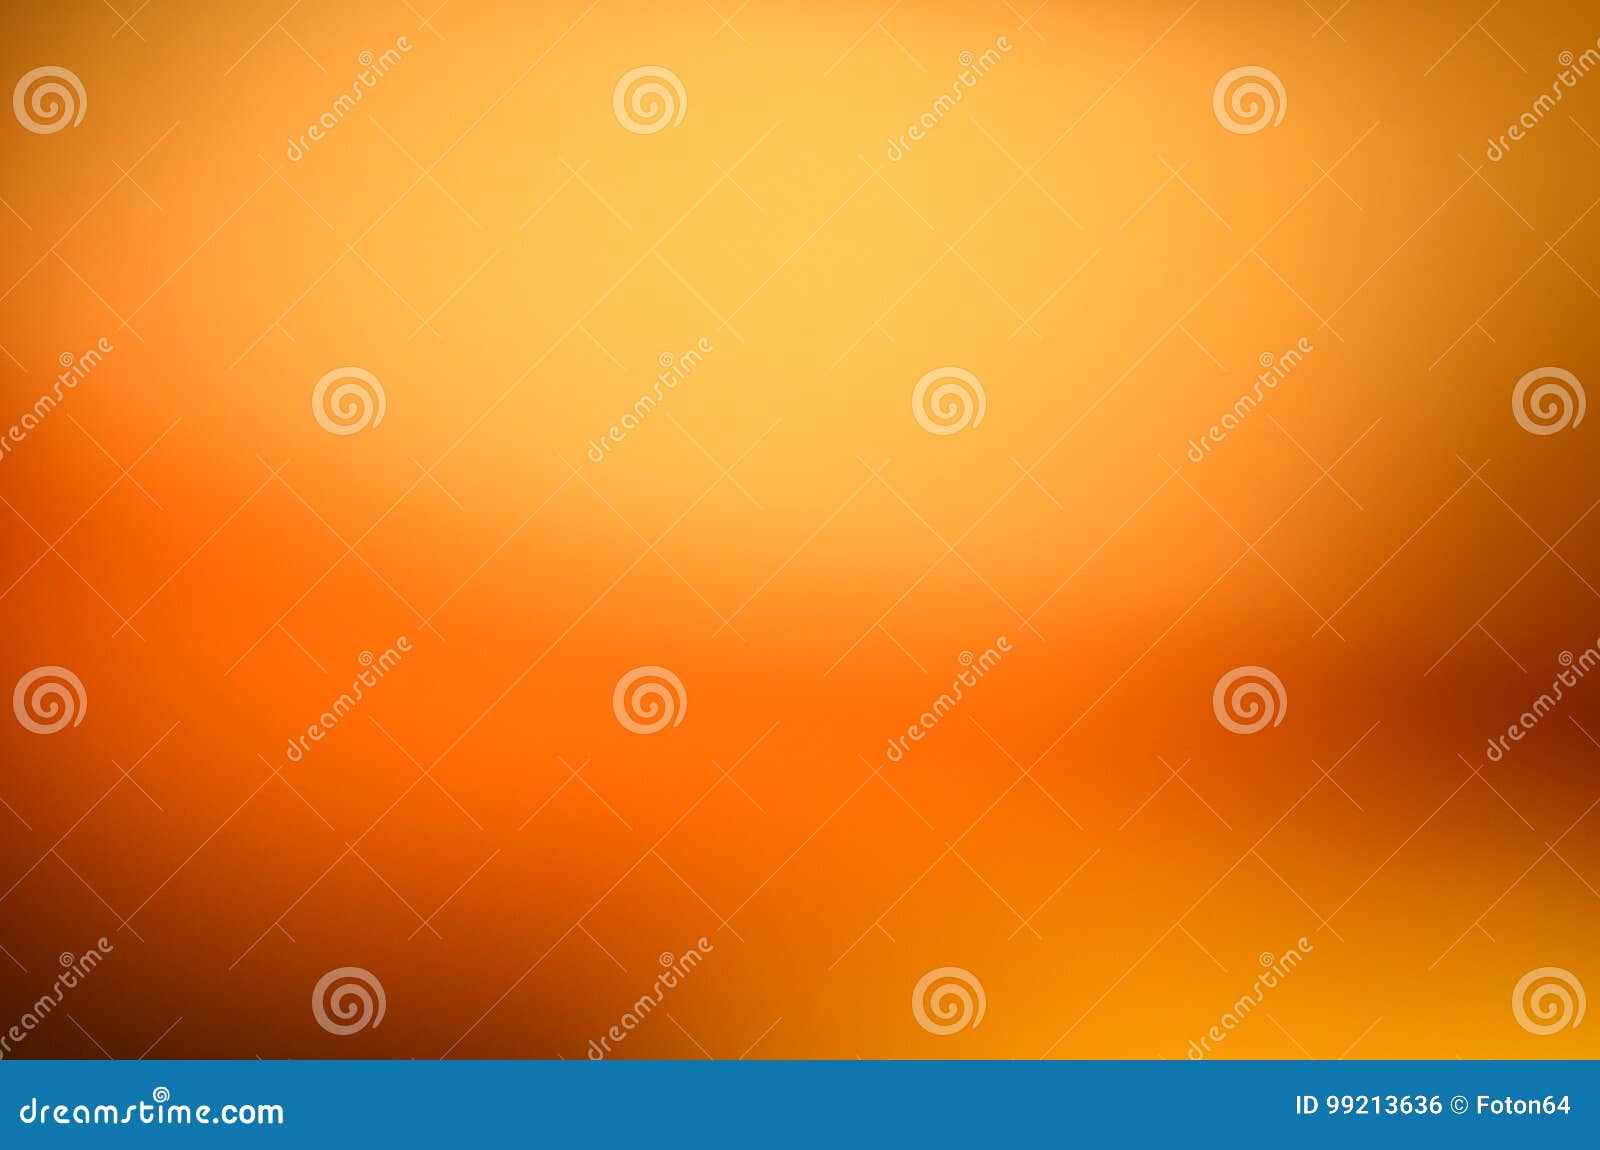 abstract colorful background with multiple gradients of orange and yellow colors